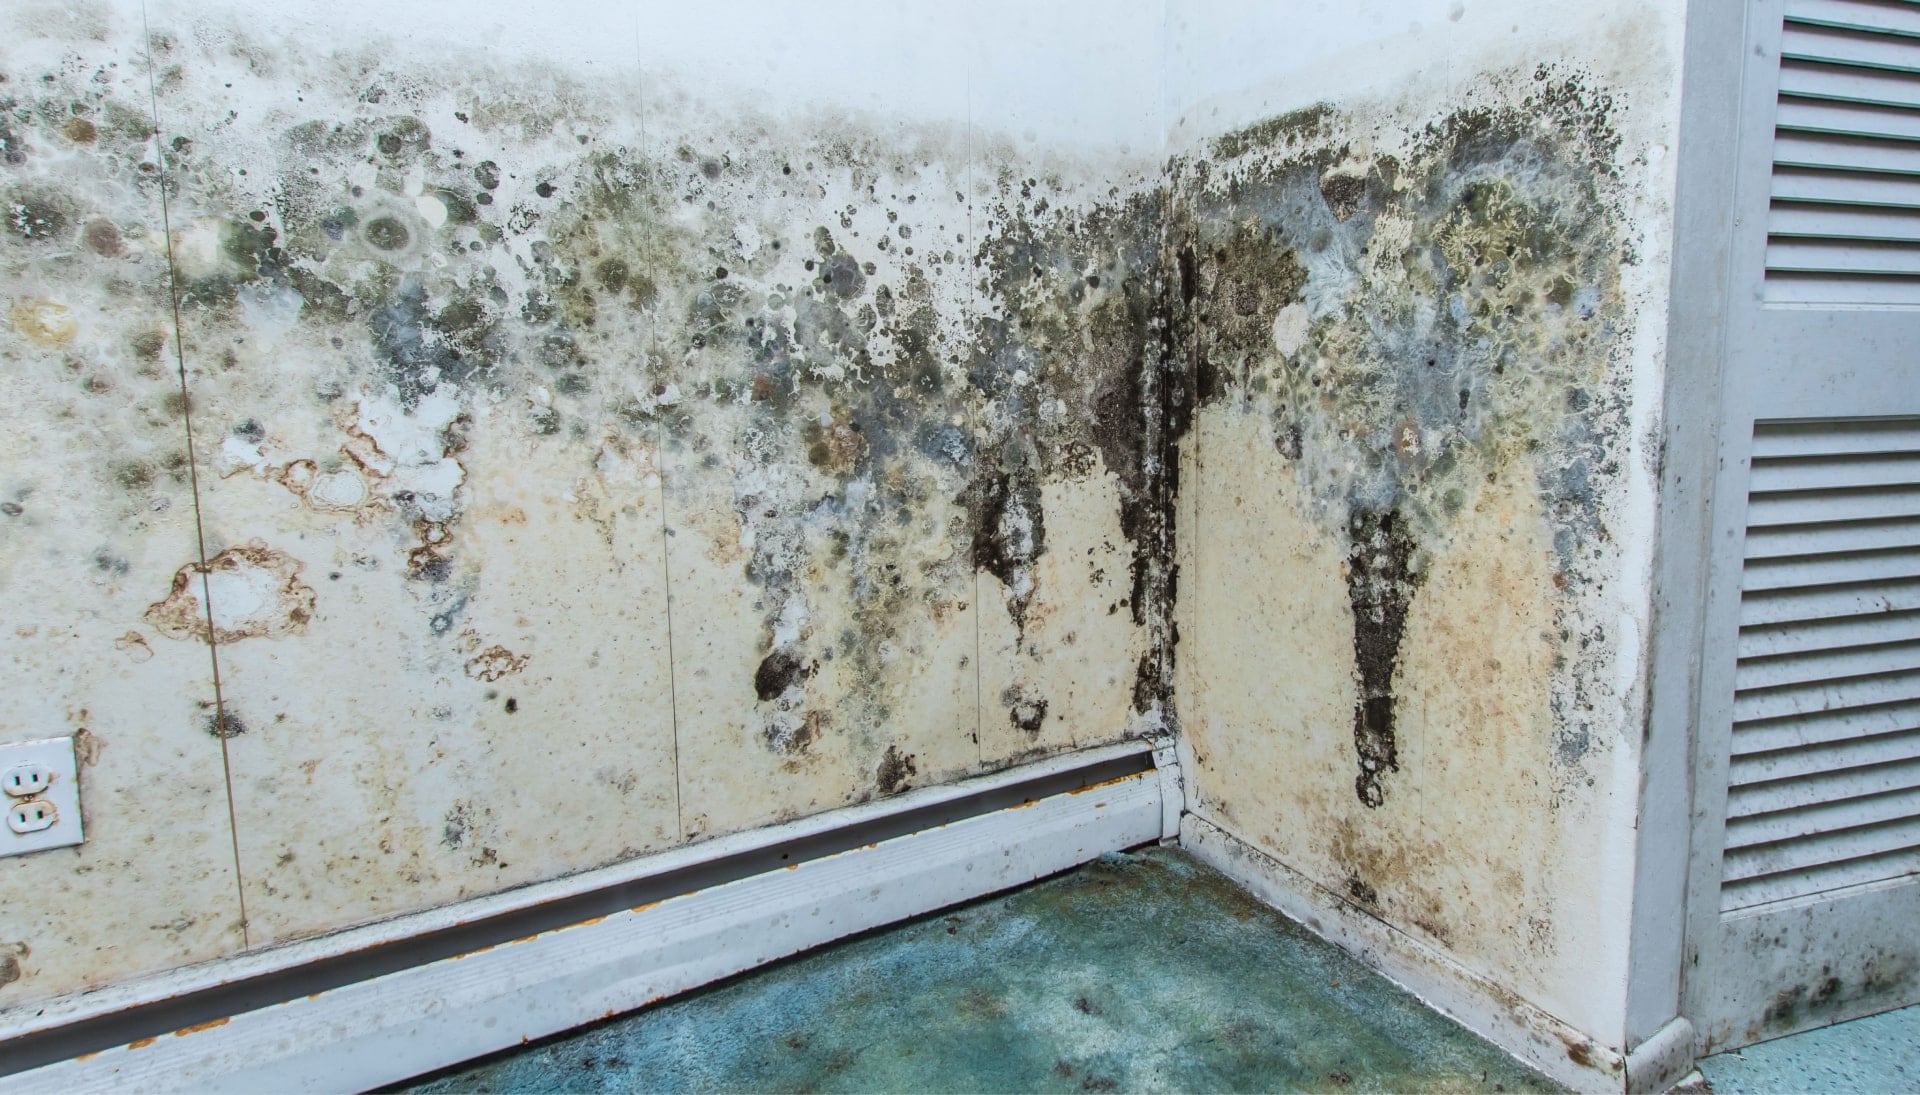 Professional mold removal, odor control, and water damage restoration service in Topeka, Kansas.